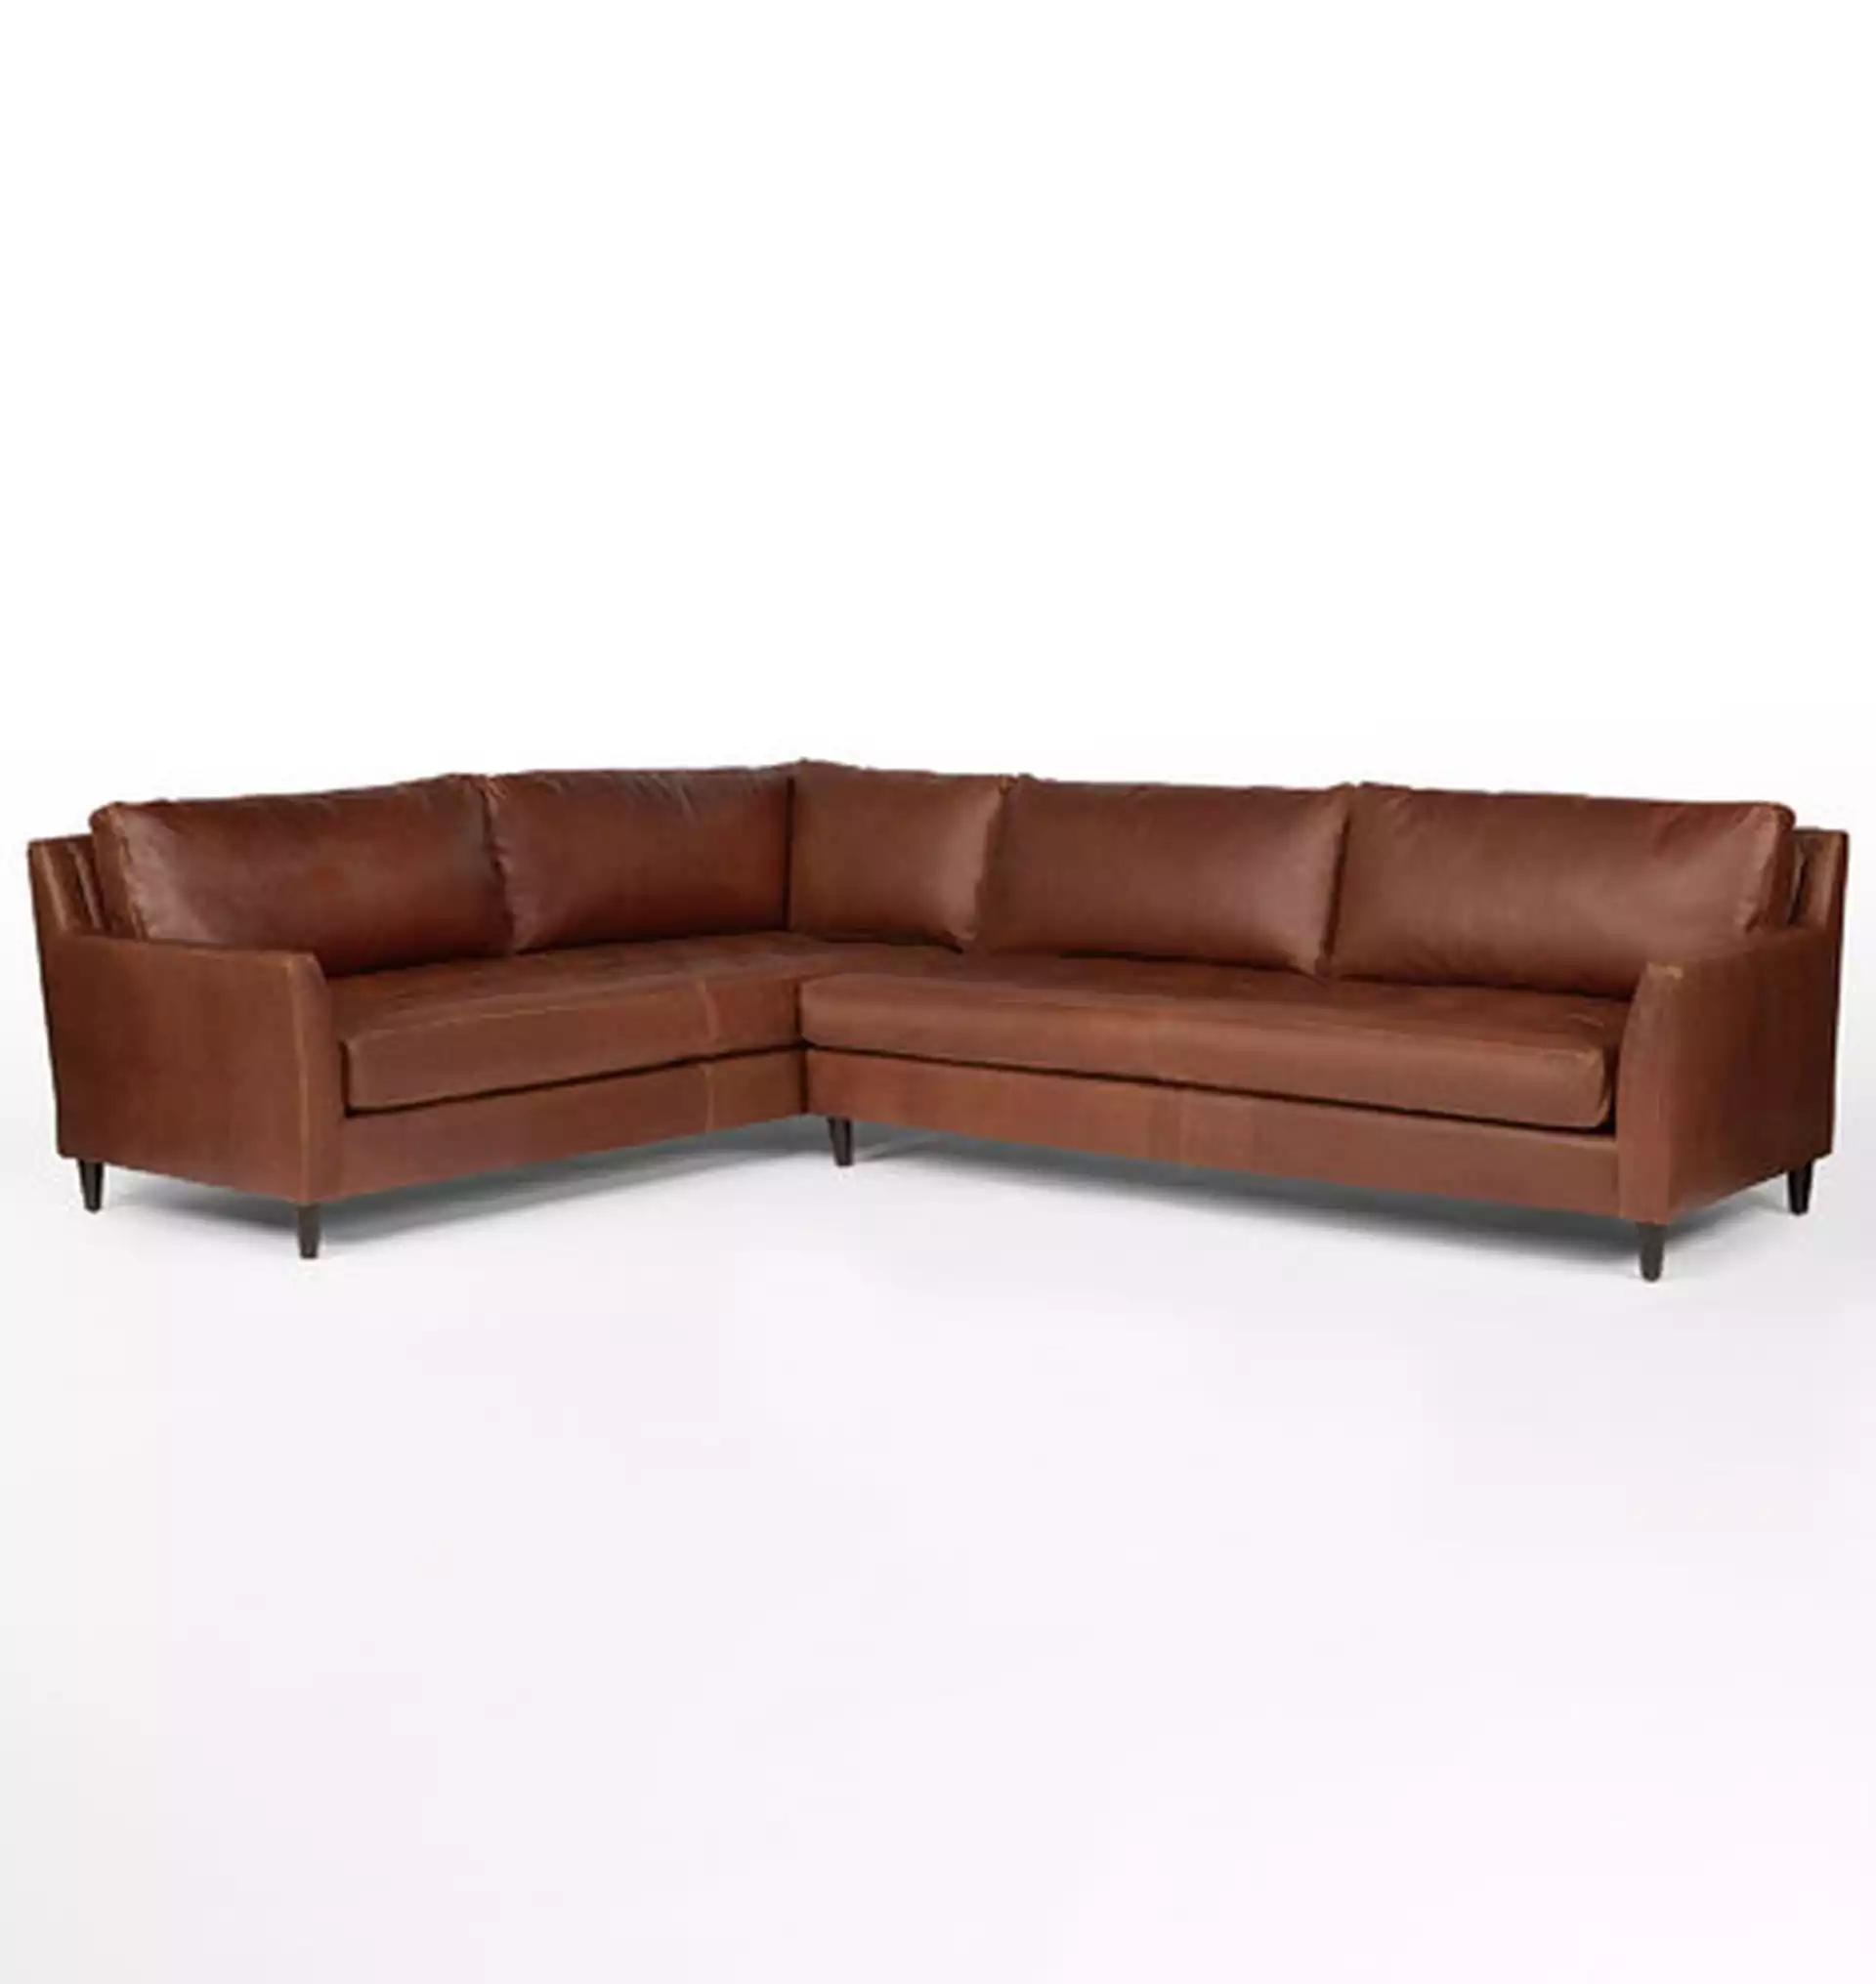 Hastings Arm Sectional Leather Sofa, Pure Saddle